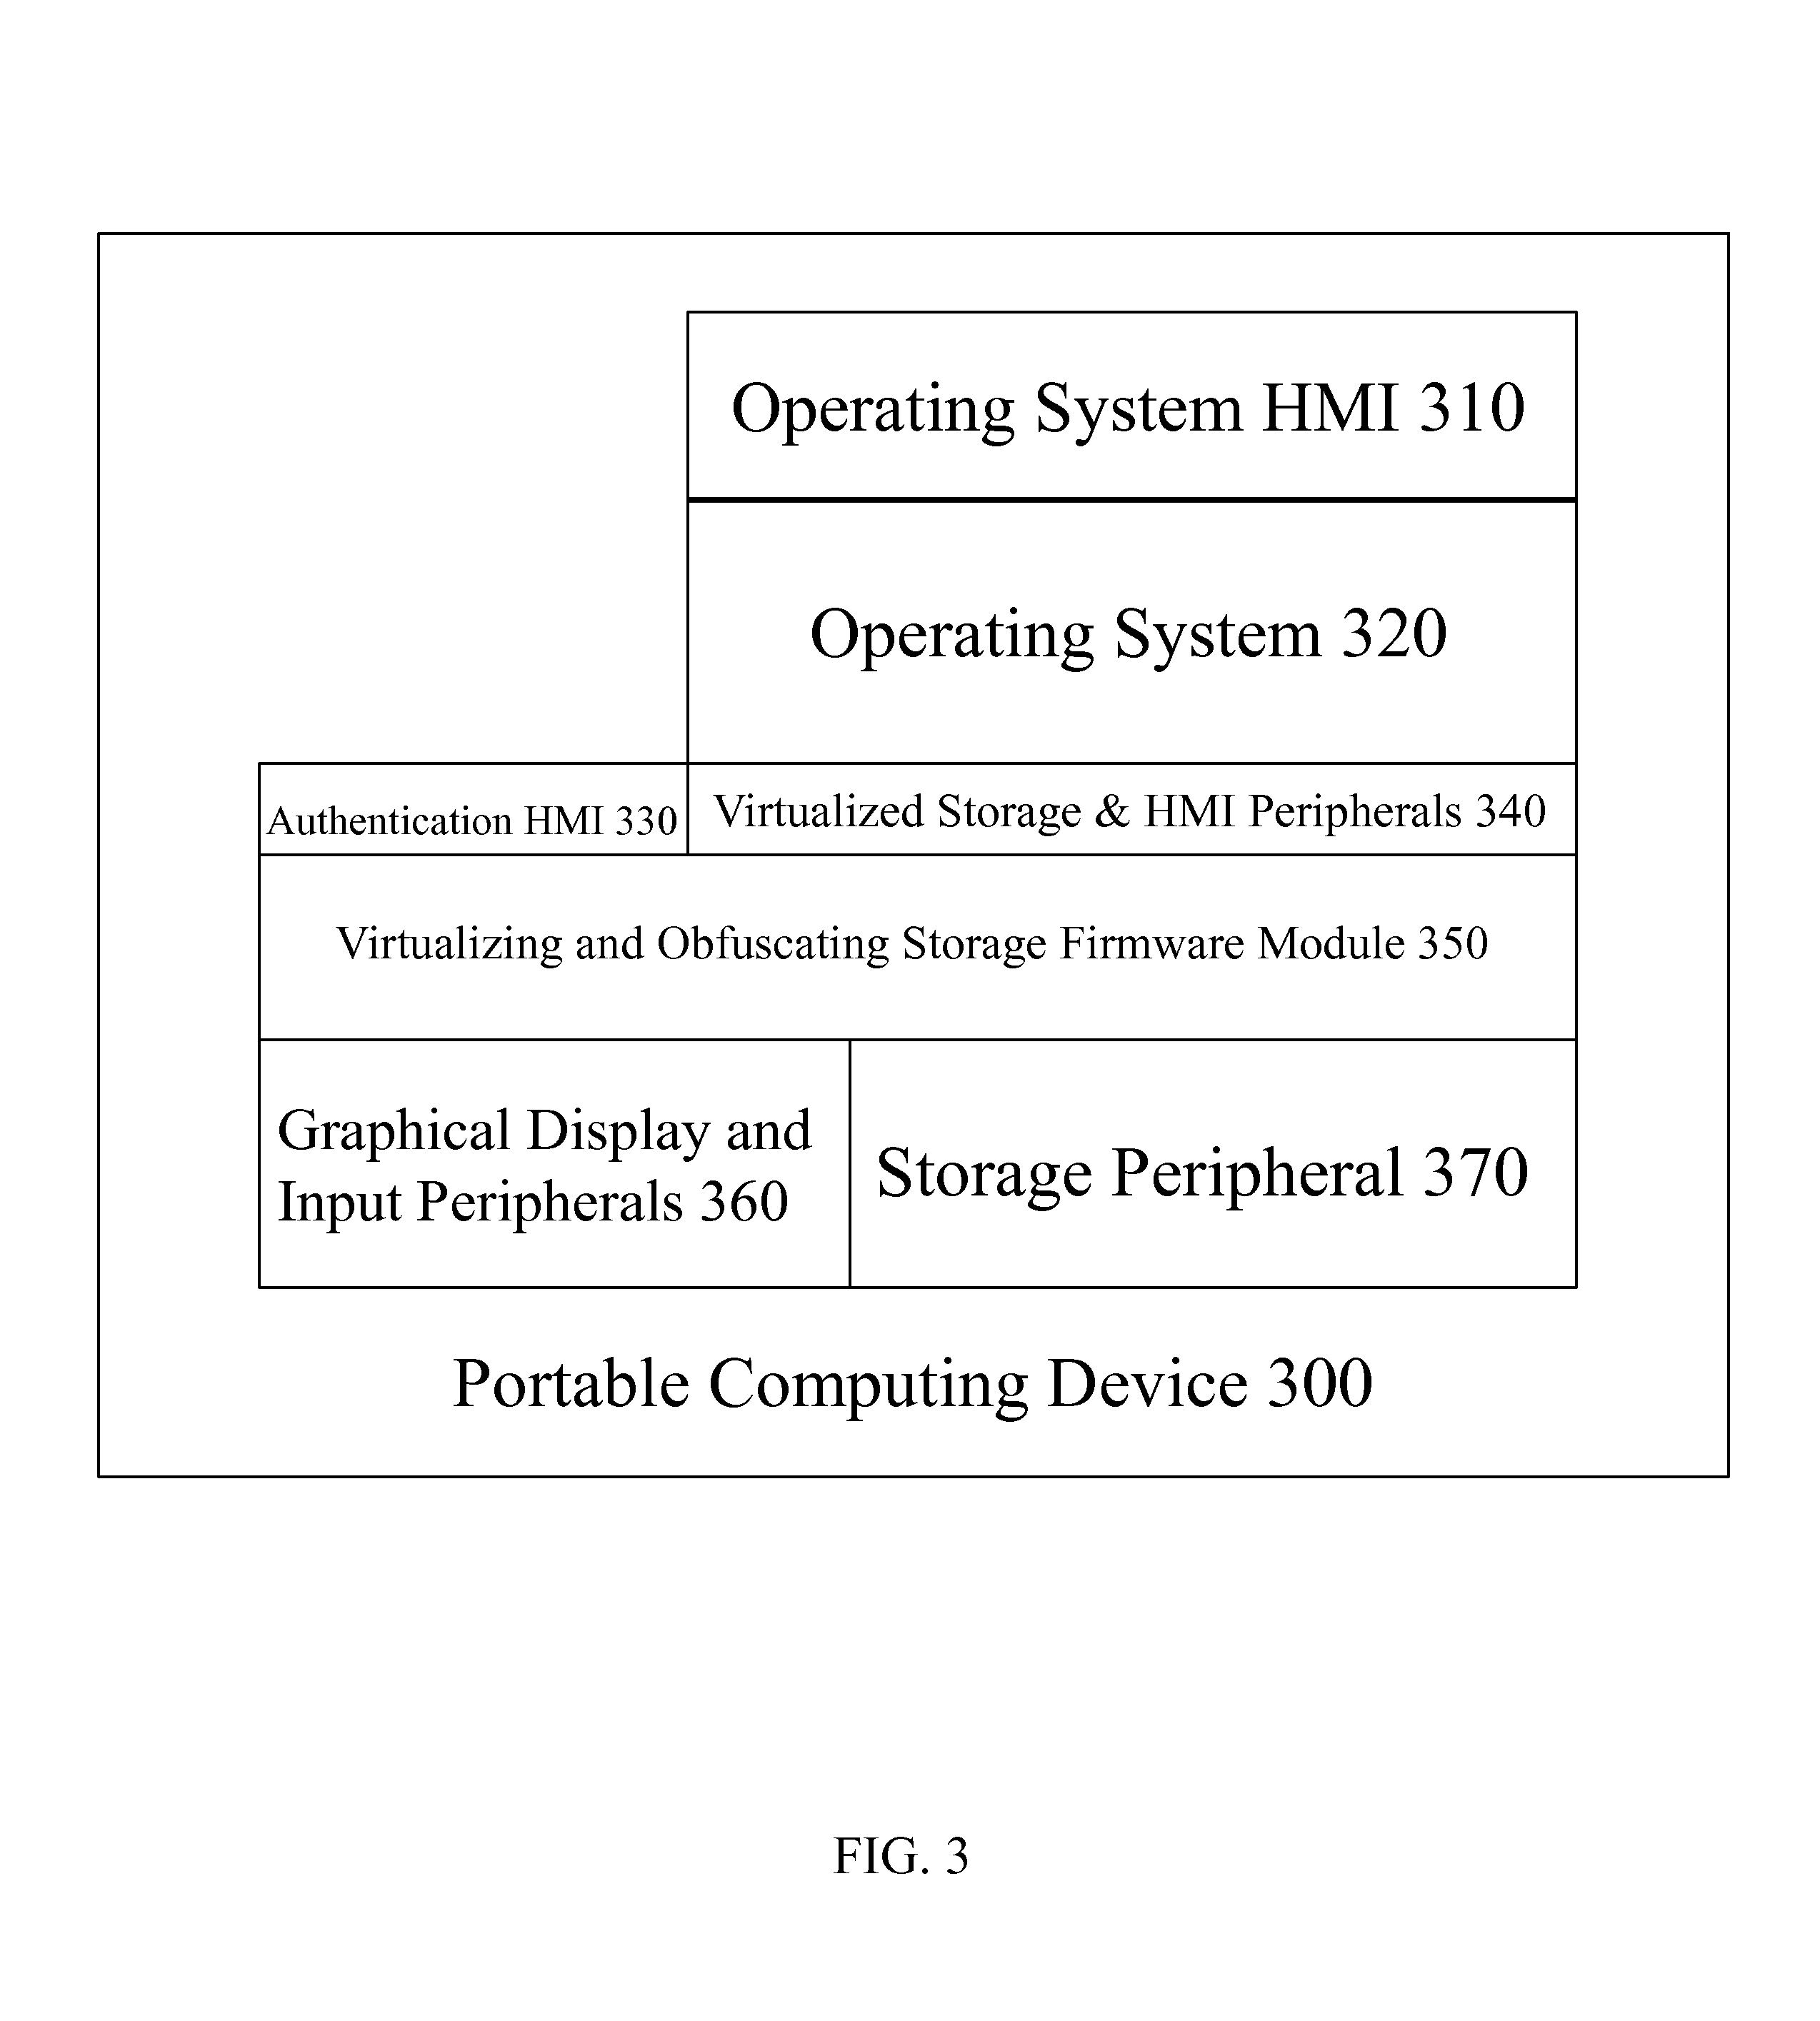 Single-Chip Virtualizing and Obfuscating Storage System for Portable Computing Devices